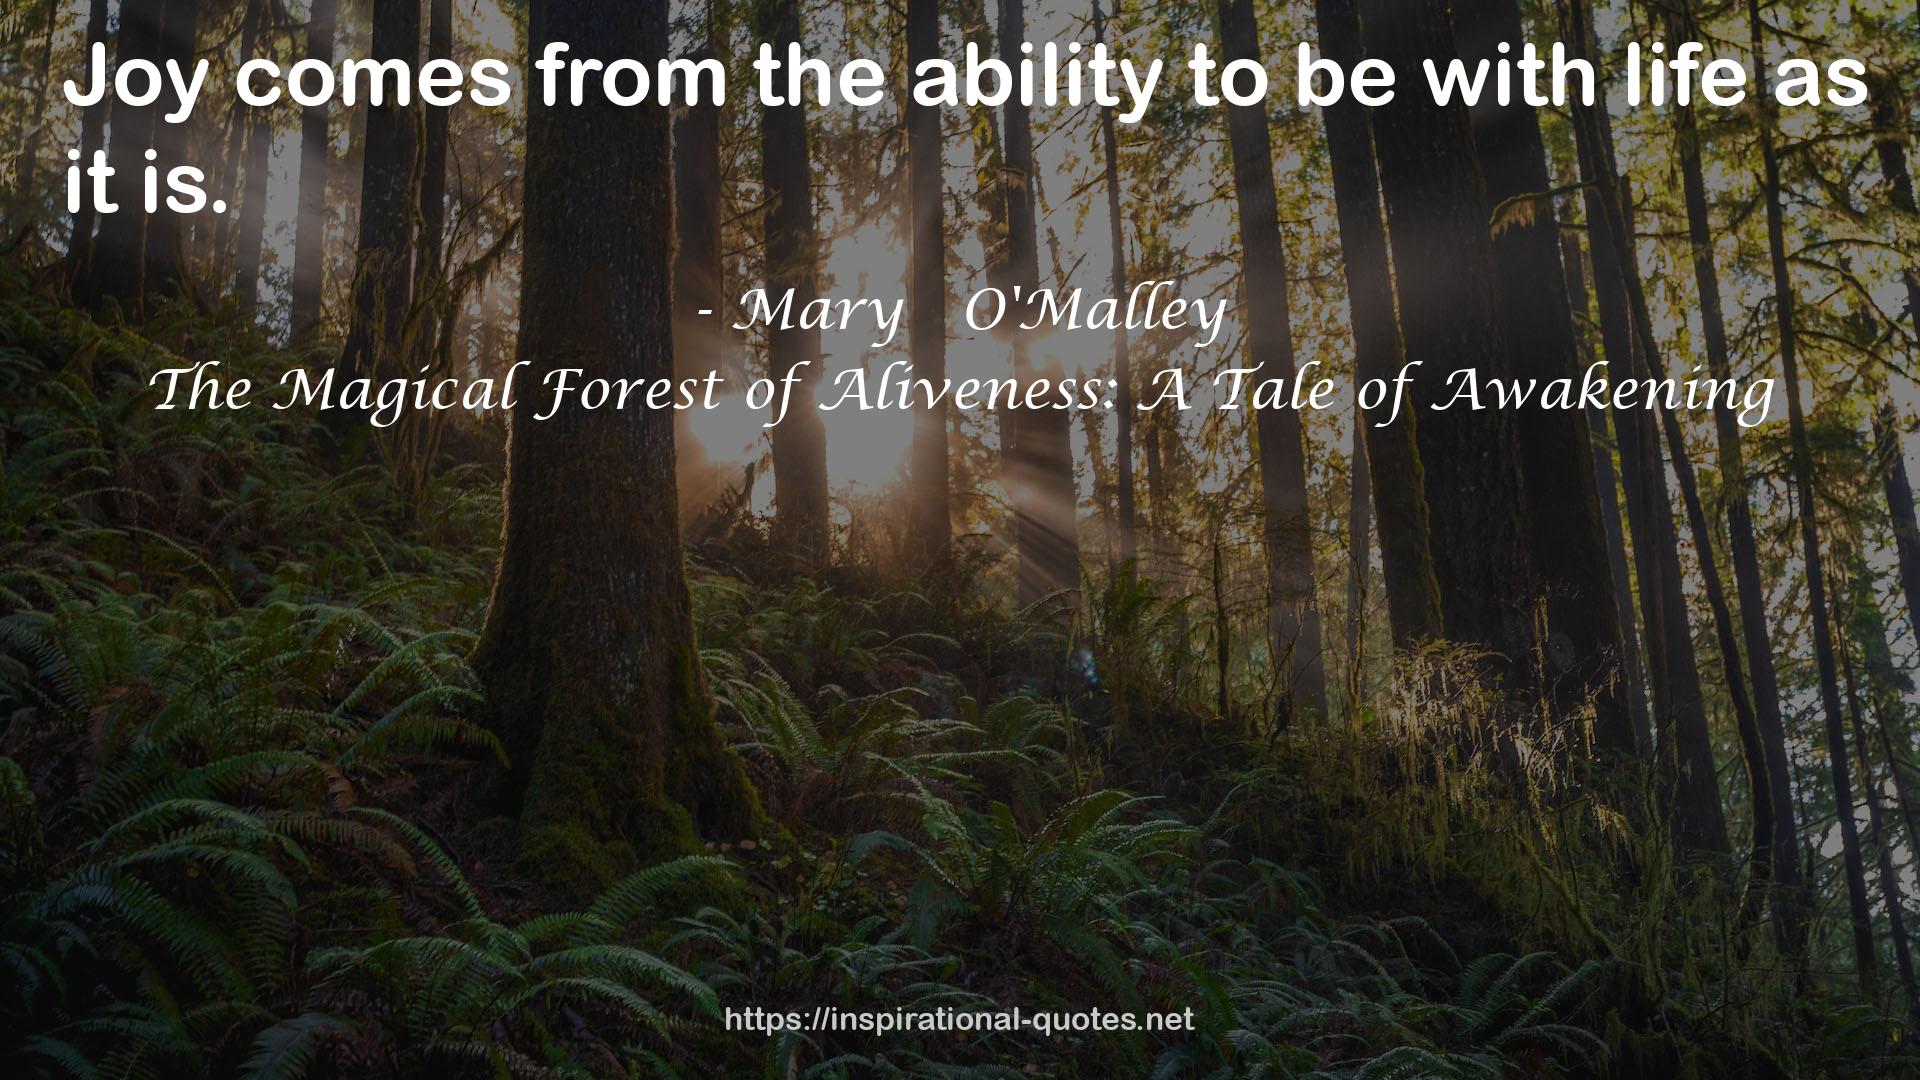 The Magical Forest of Aliveness: A Tale of Awakening QUOTES